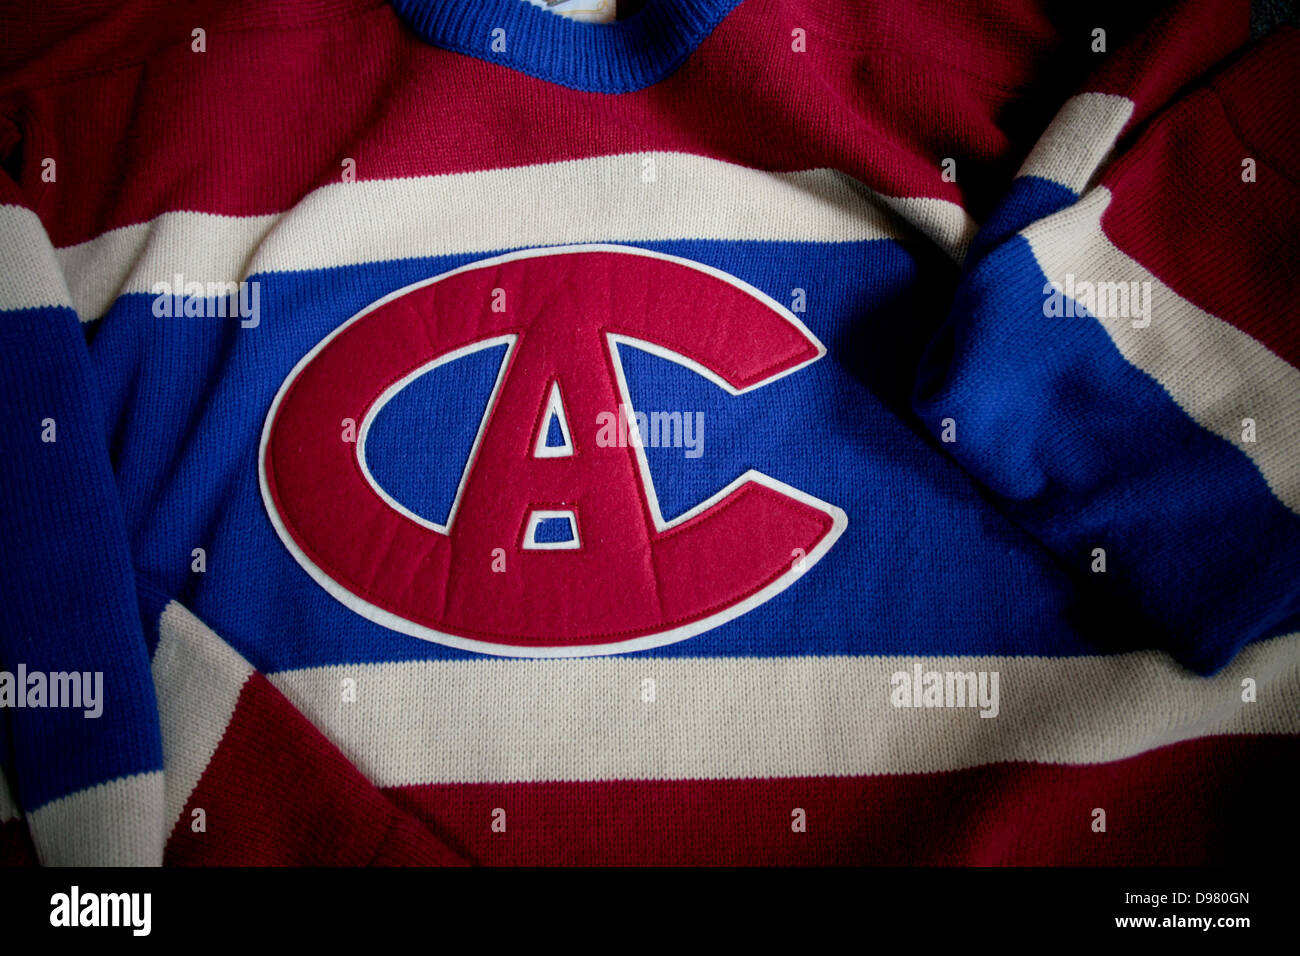 montreal canadiens sweater jersey